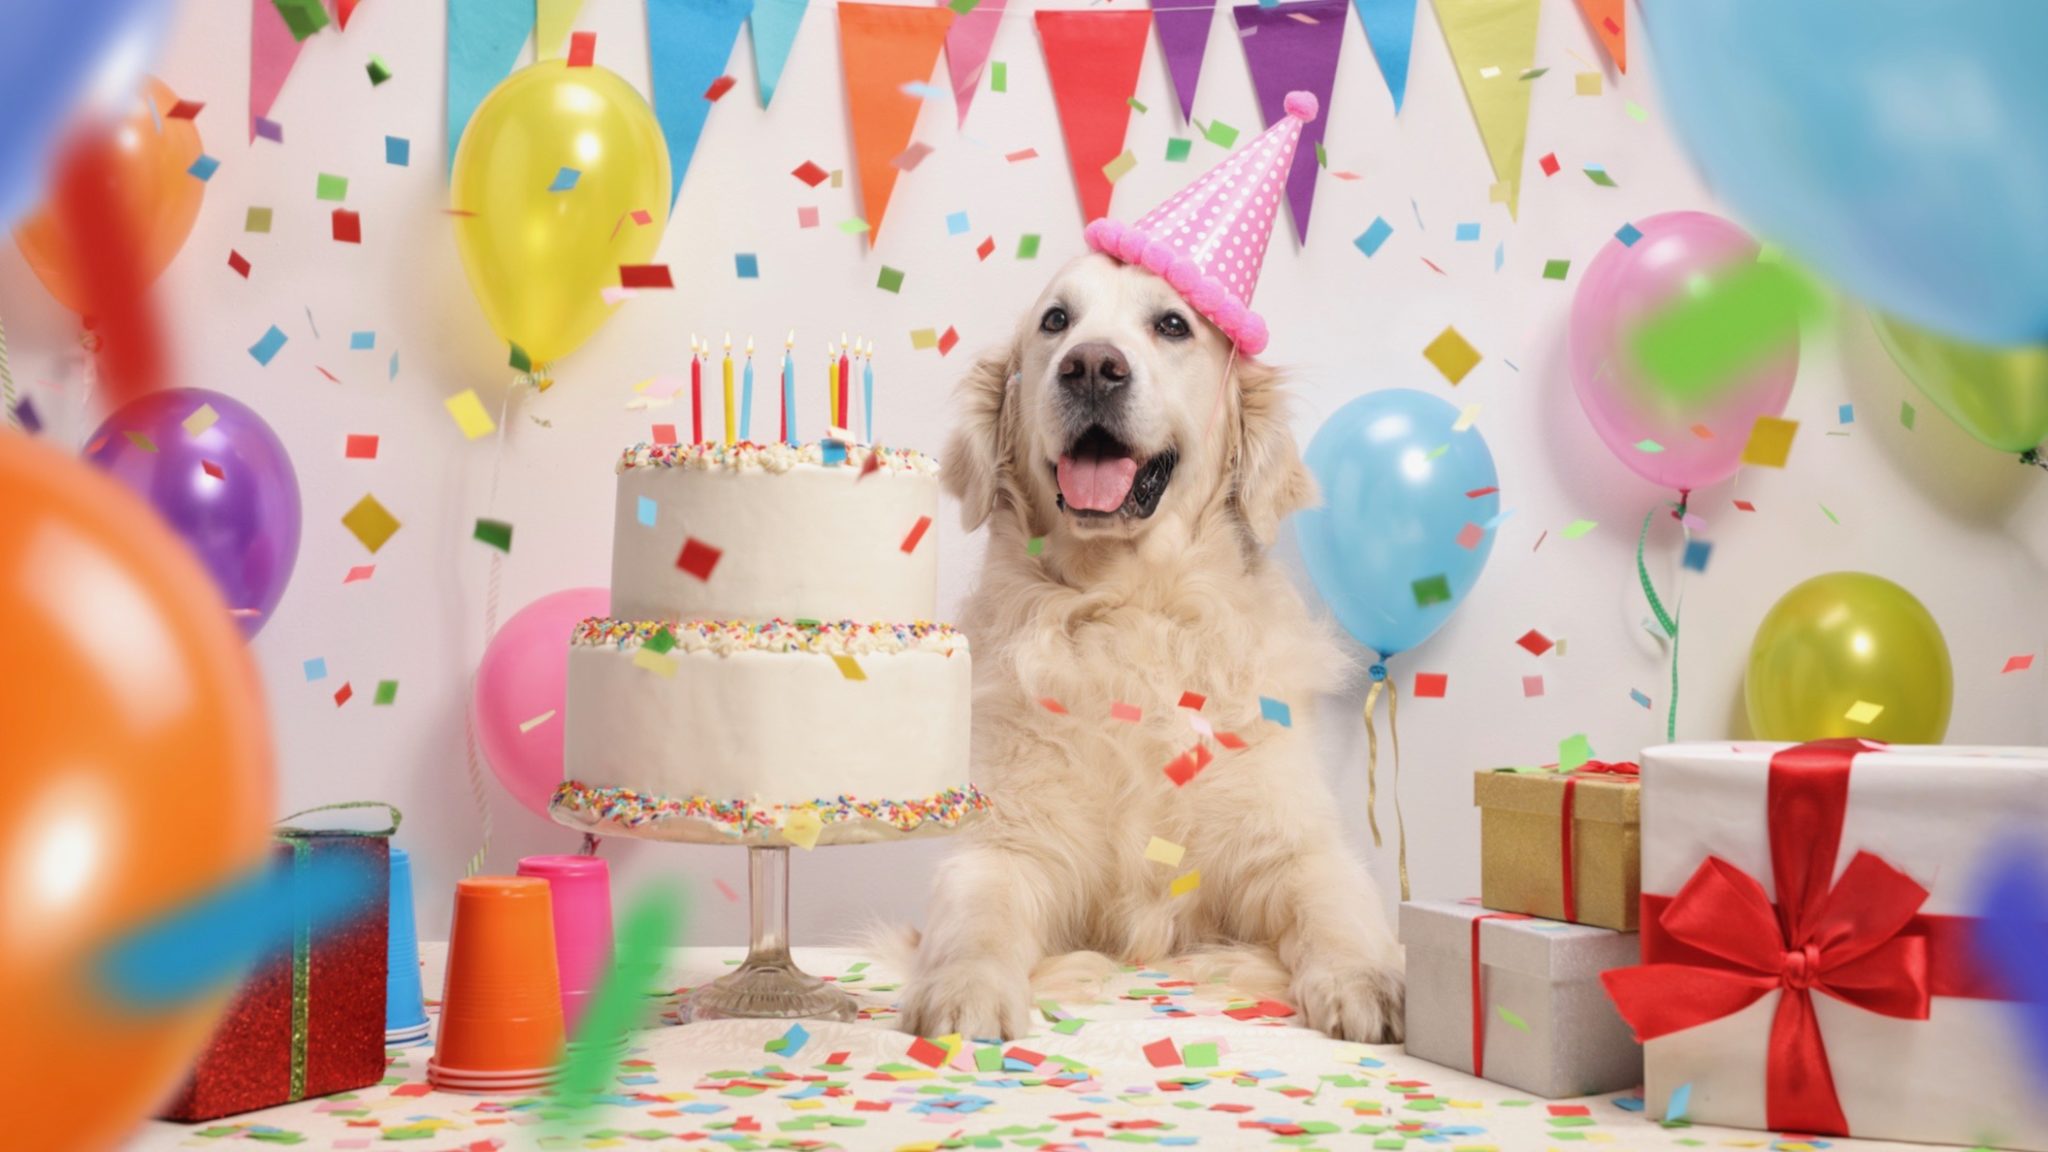 A Gift Guide for Your Dog's Birthday